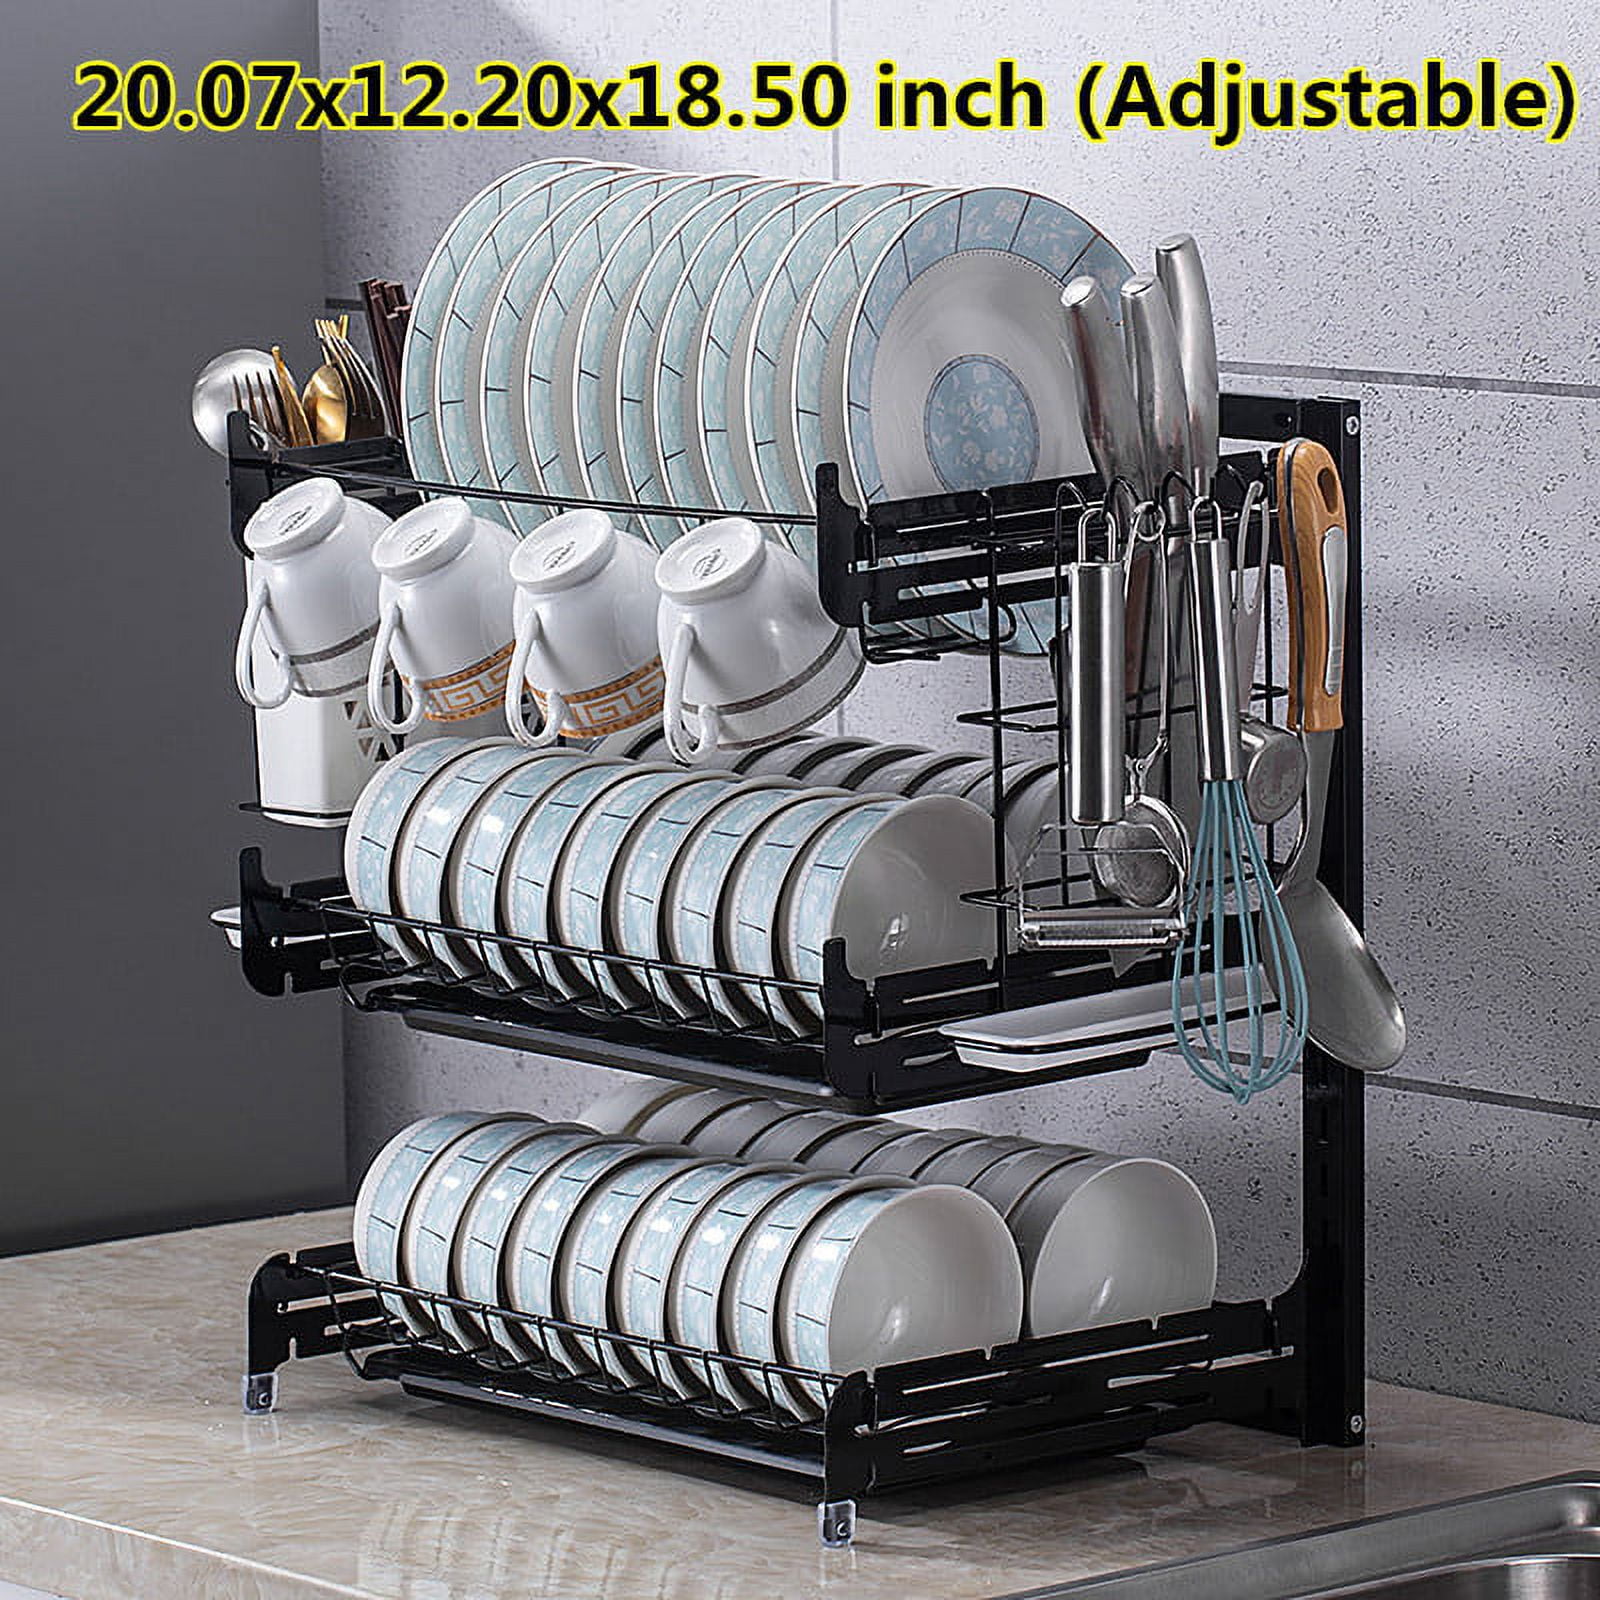 Kitchen Rack Under Sink Storage To Ground Household Layered Cabinet Rack  Countertop Multi-functional Pull-out Storage Rack - Racks & Holders -  AliExpress